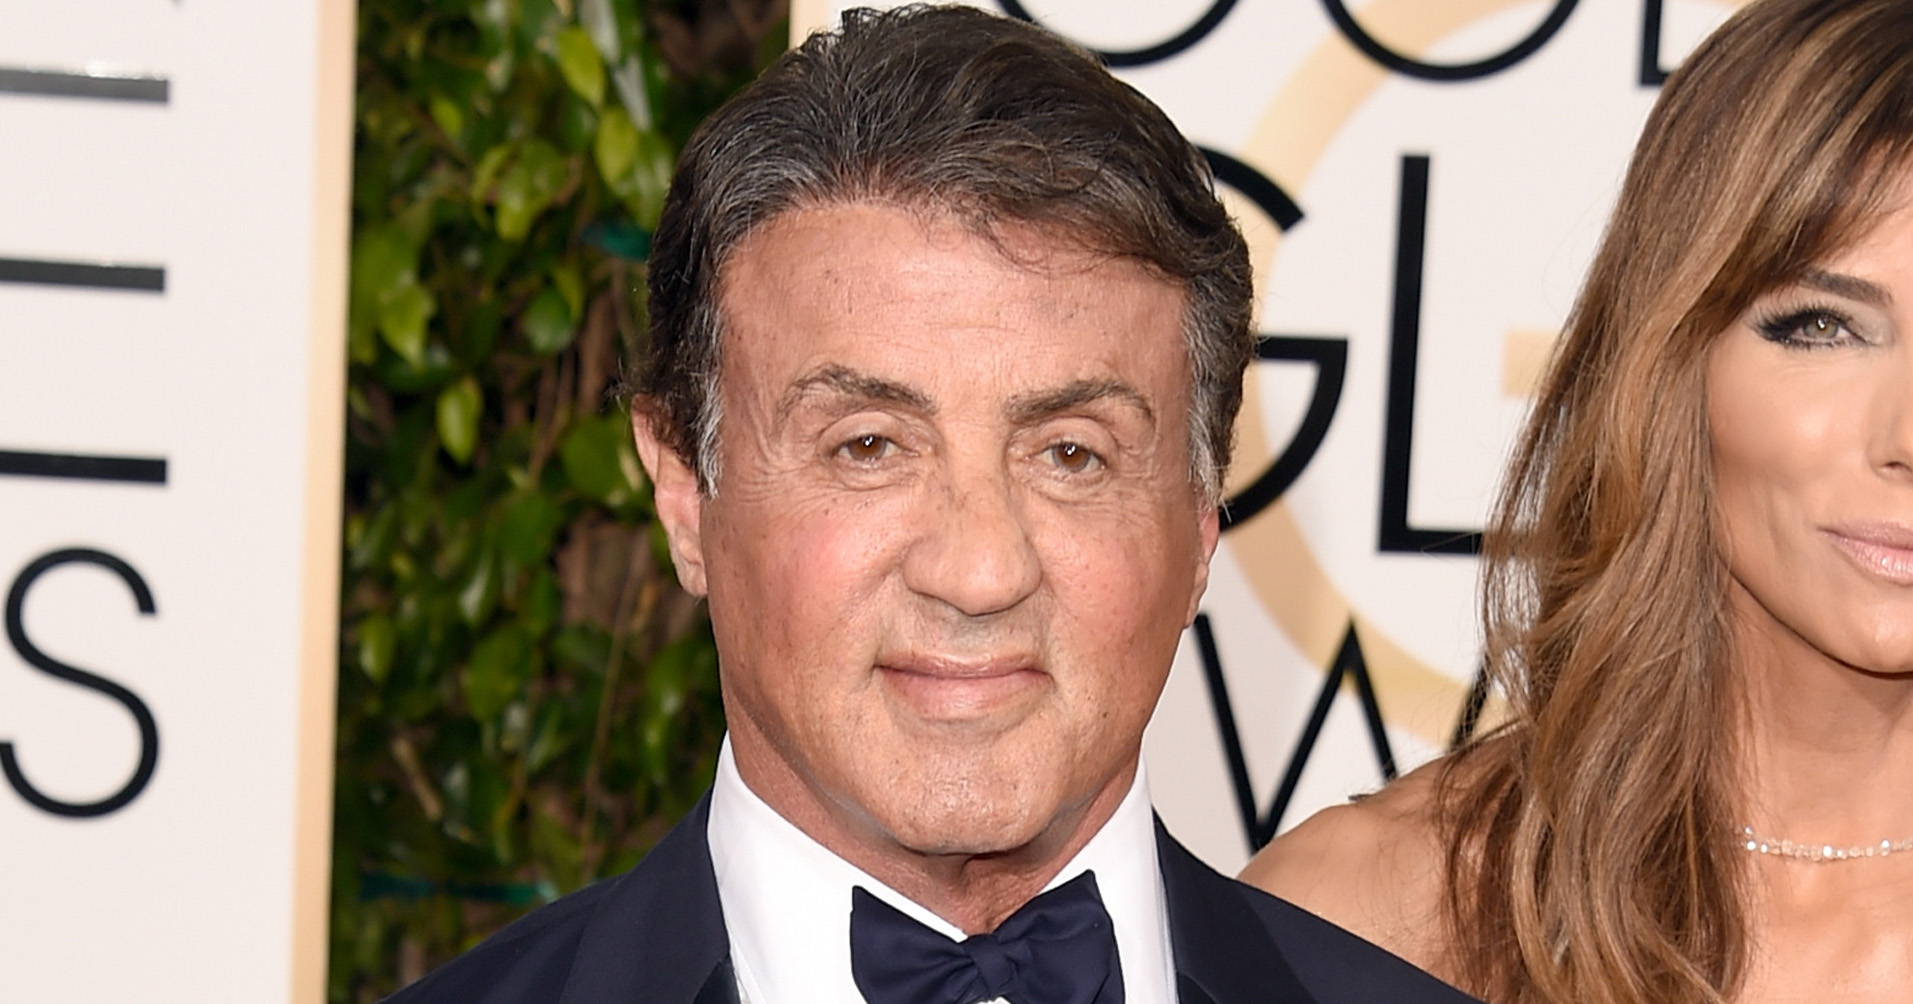 Sylvester Stallone attends the 73rd Annual Golden Globe Awards held at the Beverly Hilton Hotel on Jan. 10, 2016 in Beverly Hills.